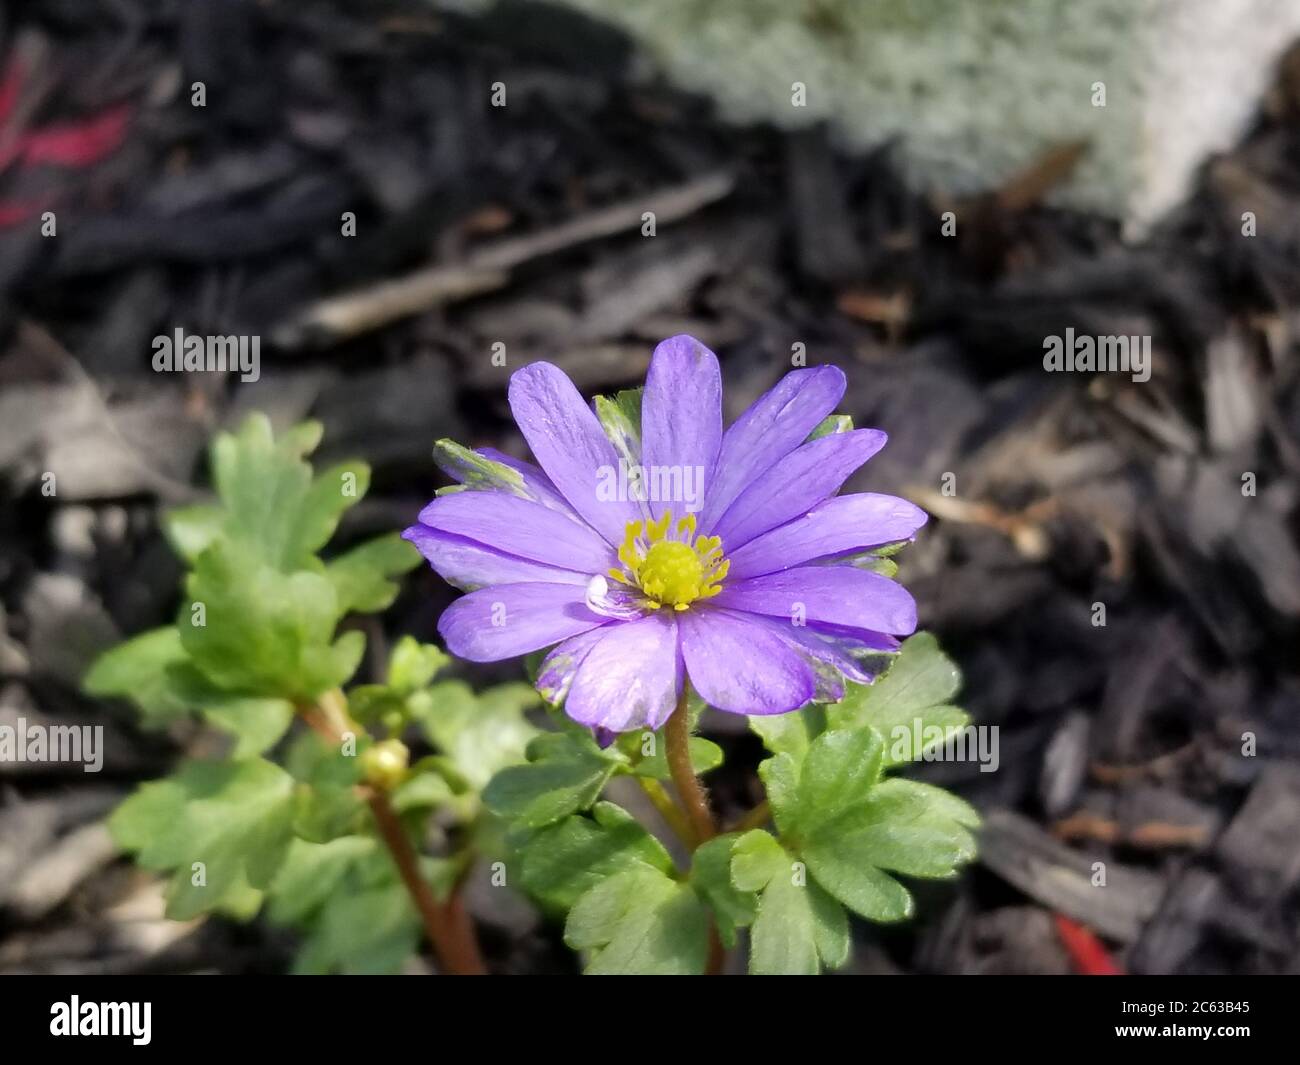 Light blue Balkan Anemone flower (Anemone blanda) also known as Grecian windflower and winter windflower, on a blurred background. Stock Photo